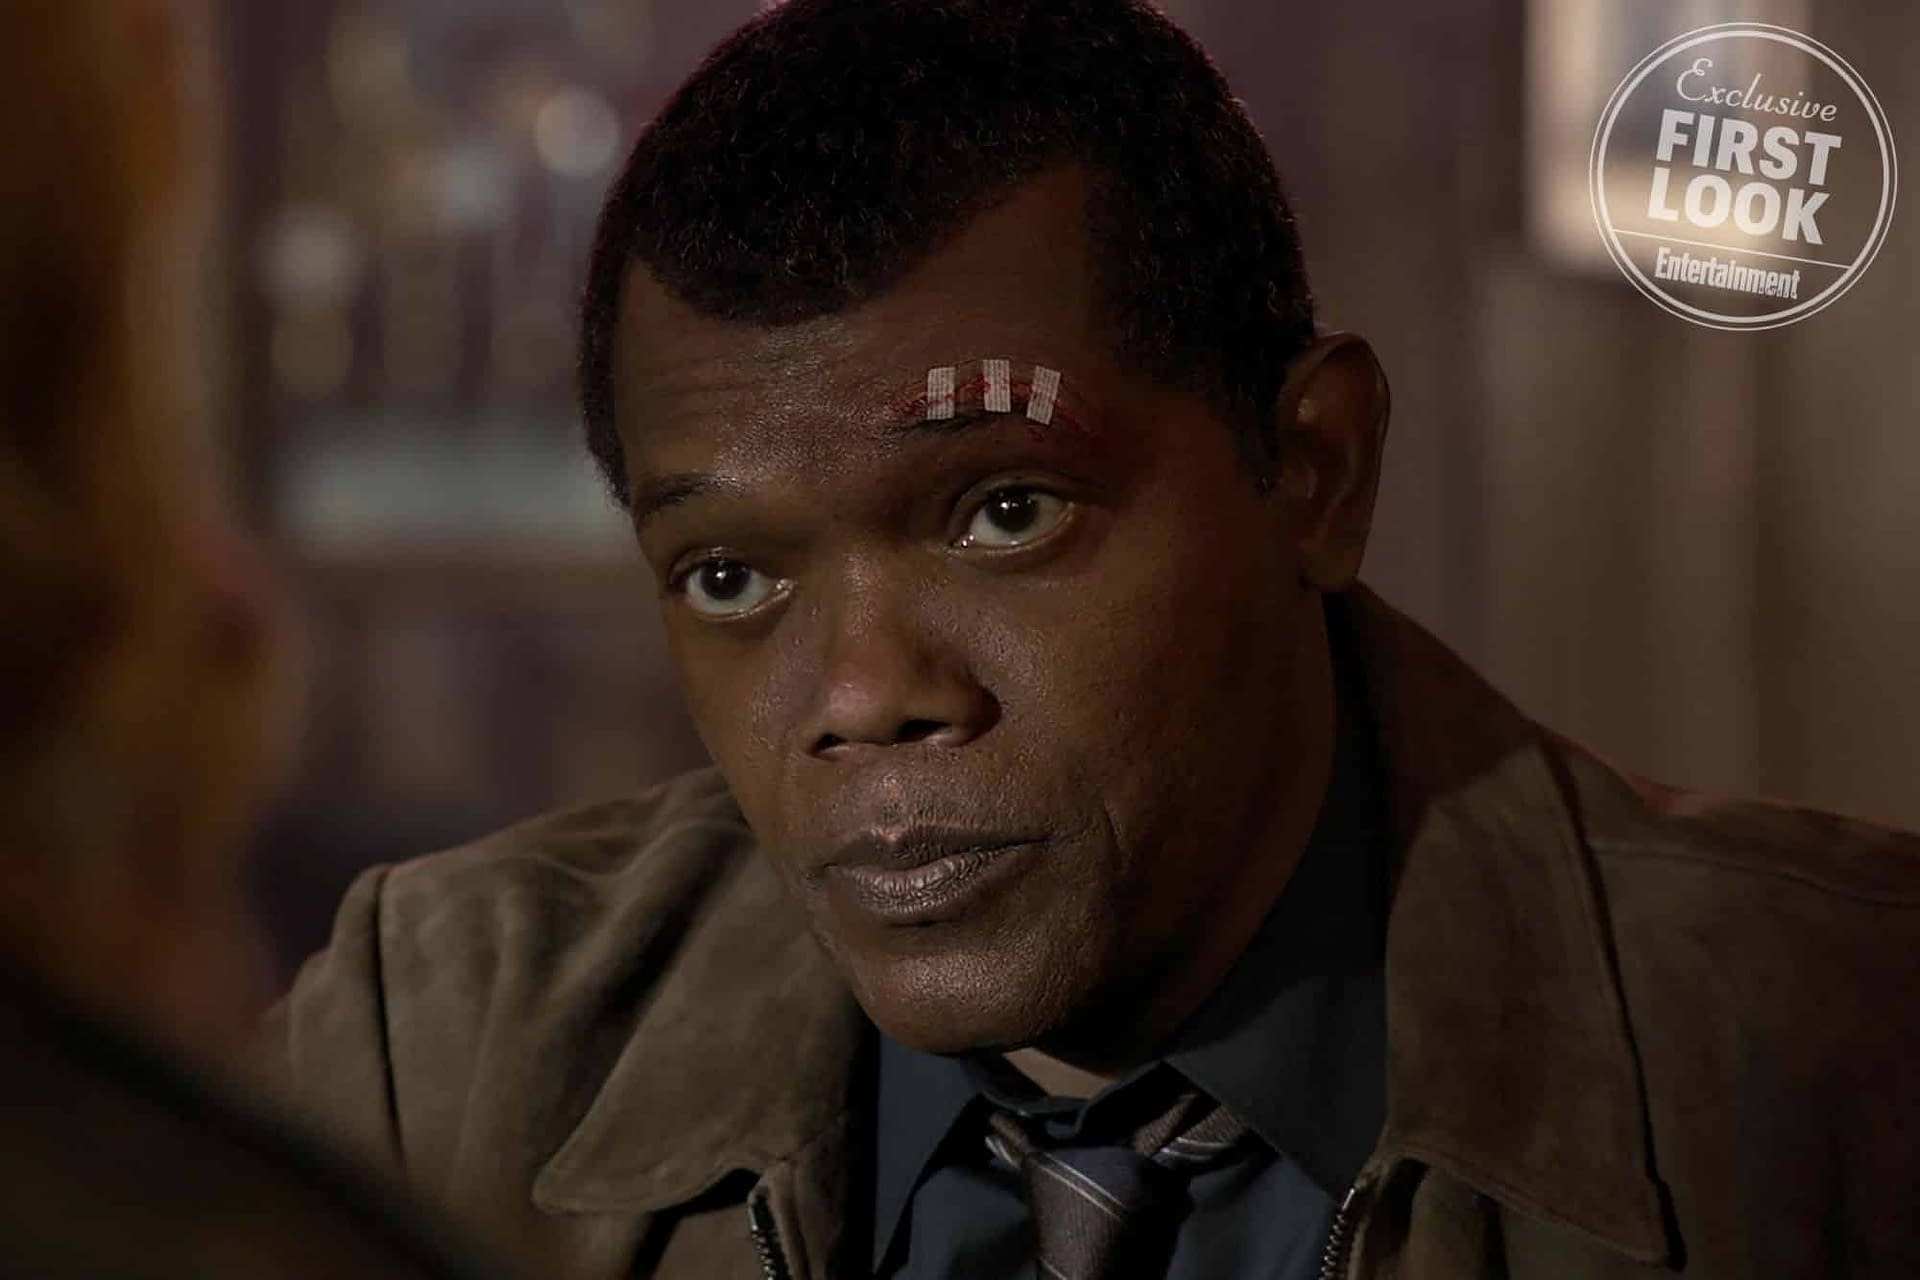 Captain Marvel's Role in Avengers 4 and Her Relationship with Nick Fury